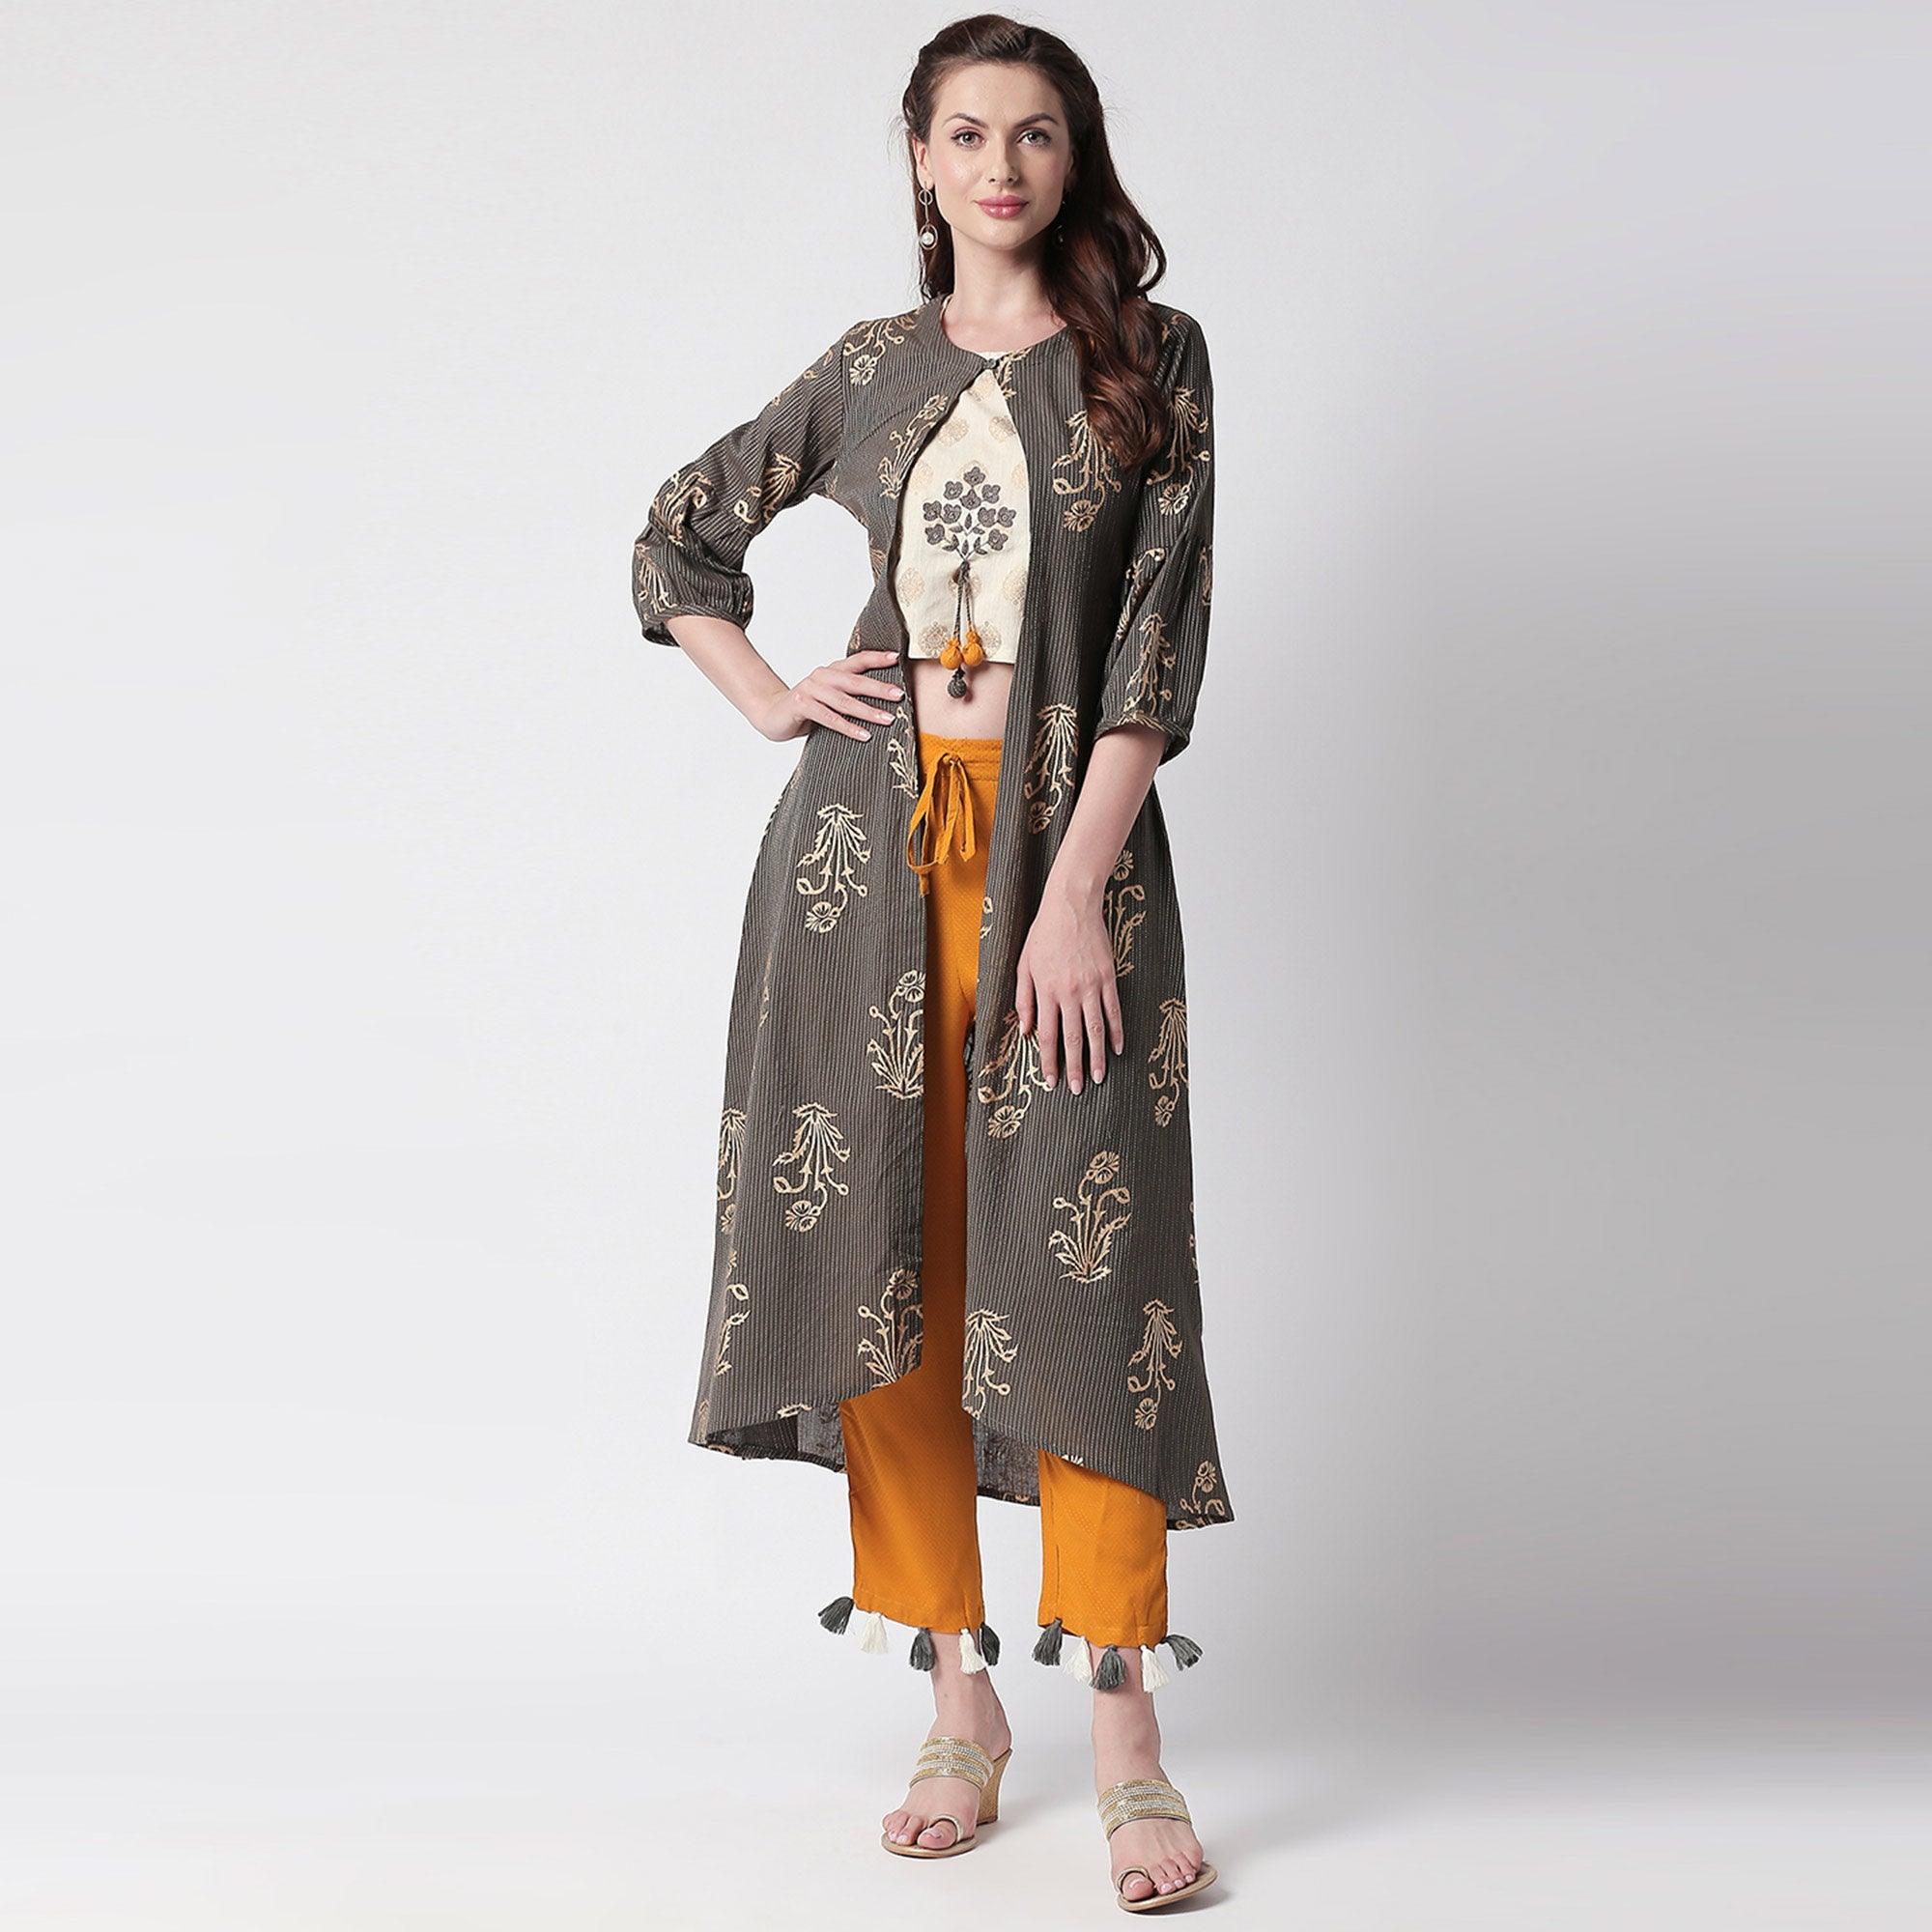 Versatile Ethnic Jackets and Shrugs for Women - House of Surya